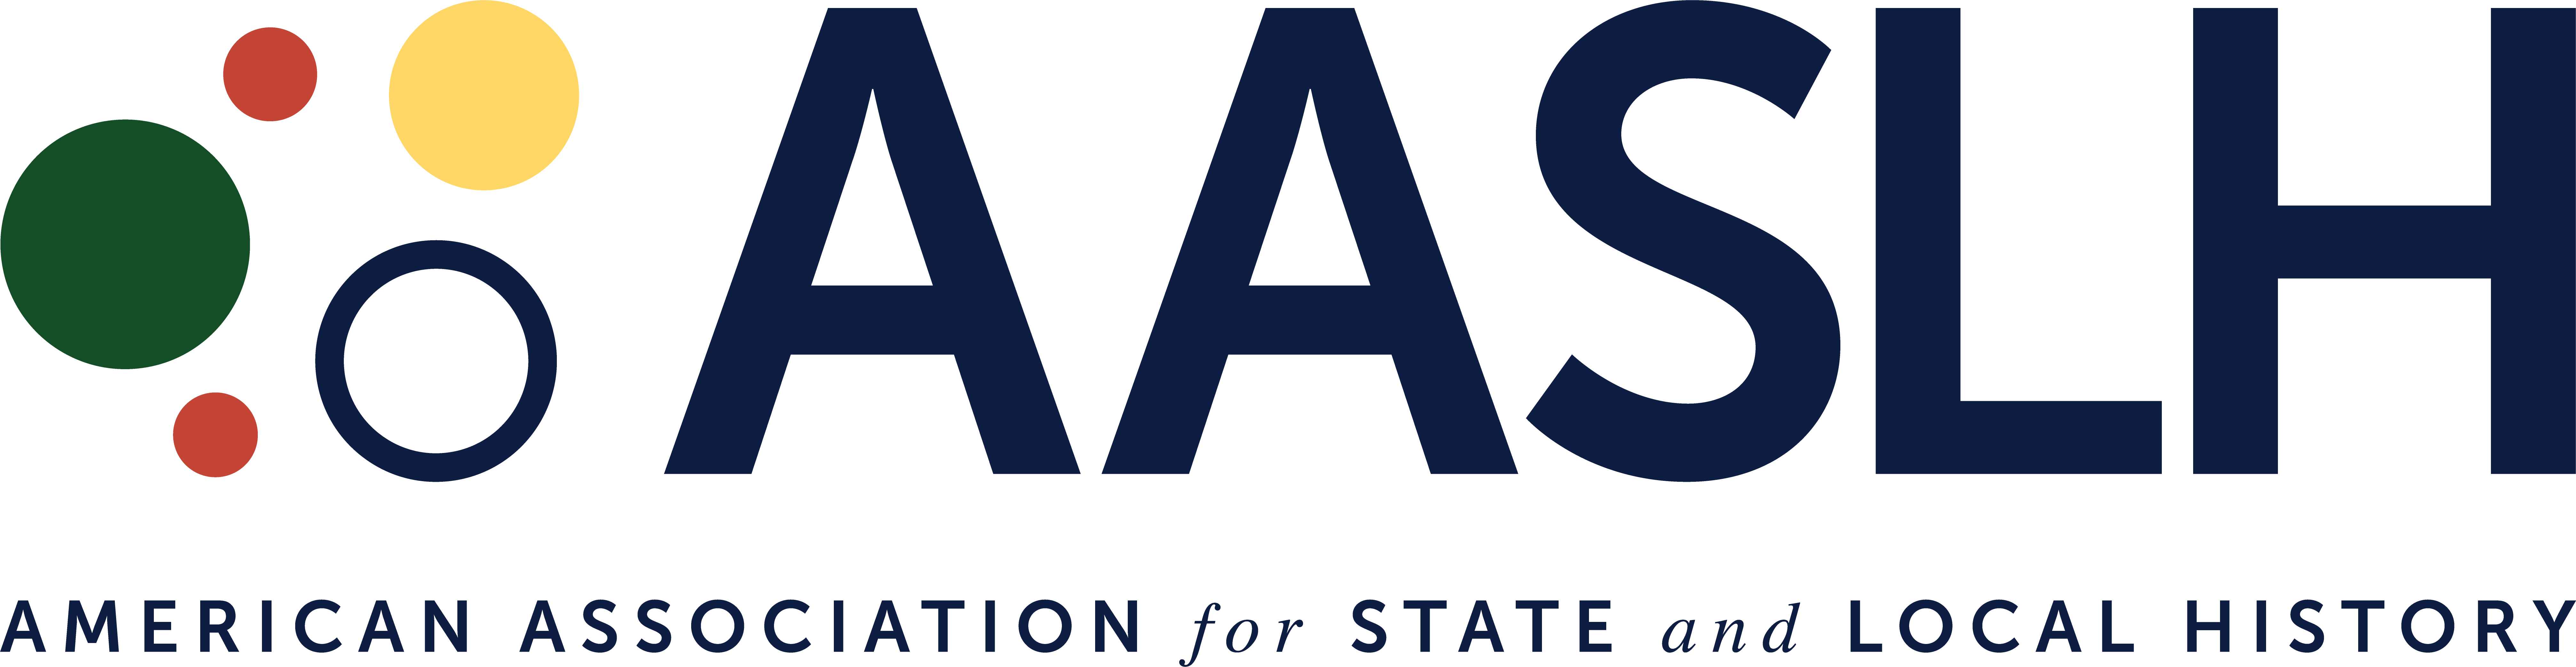 American Association for State and Local History (AASLH)